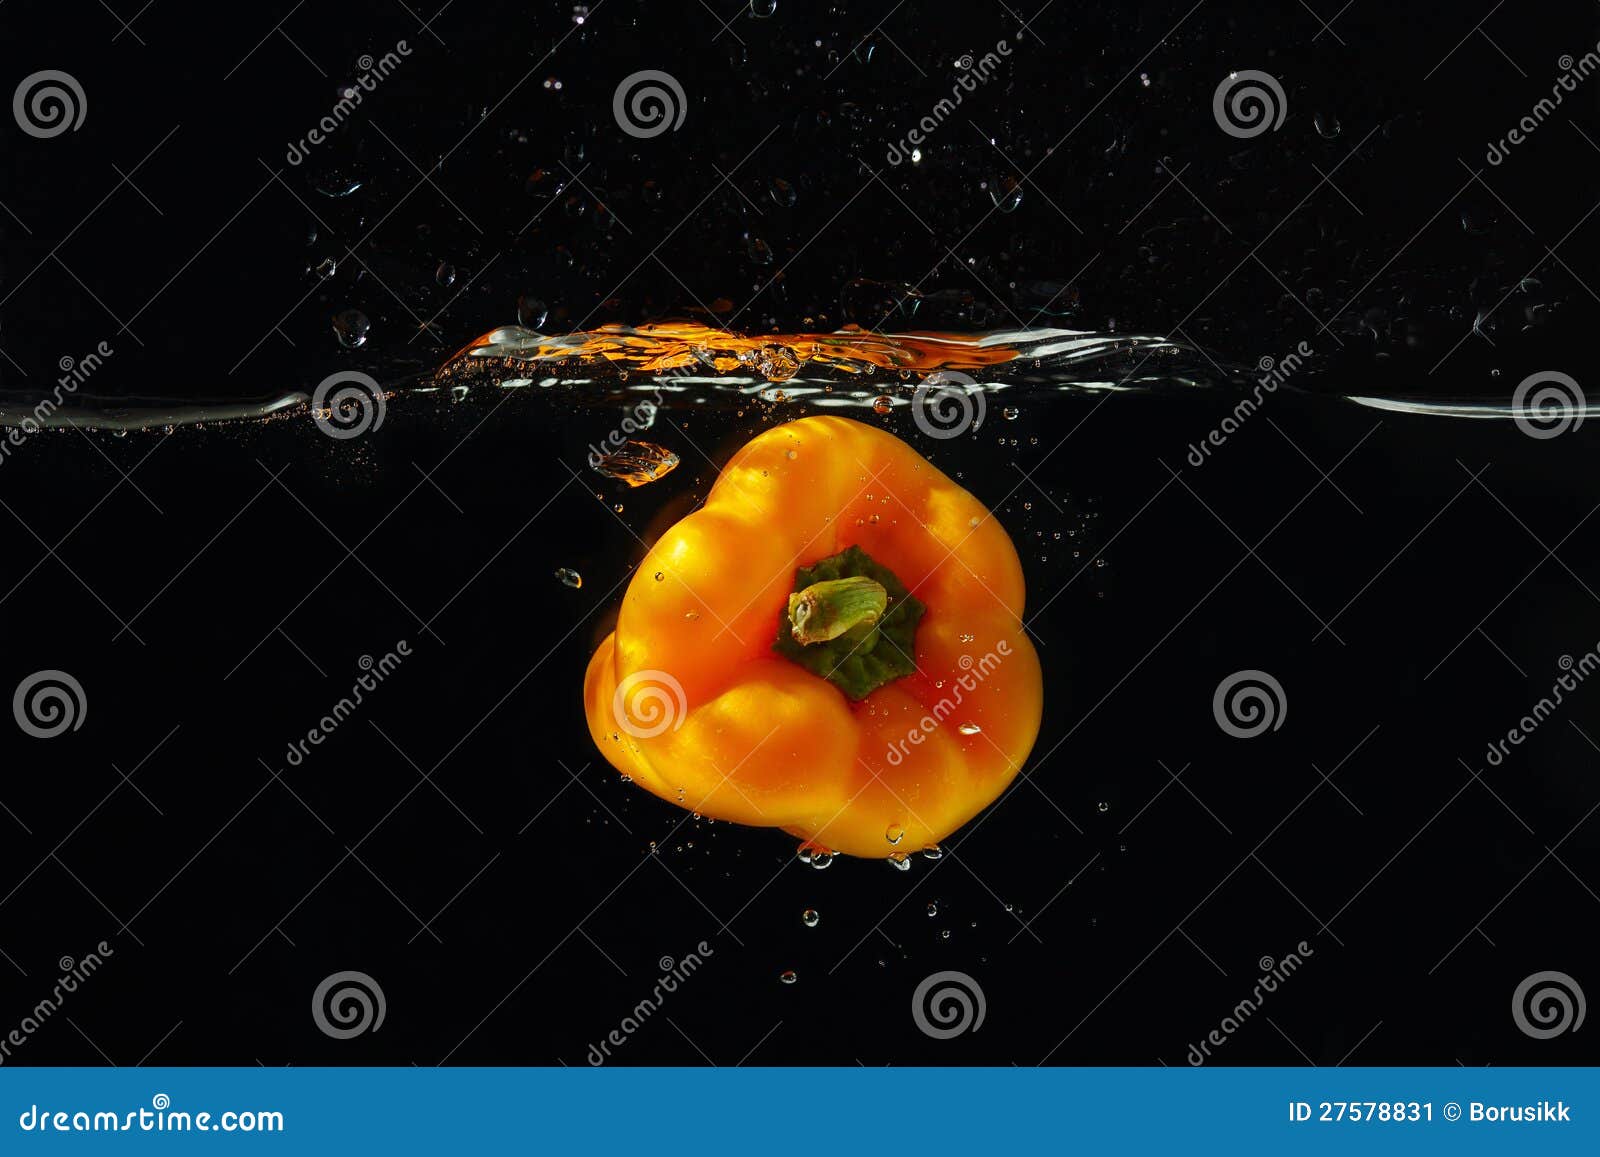 ripe yellow bellpepper falling into the water with splash